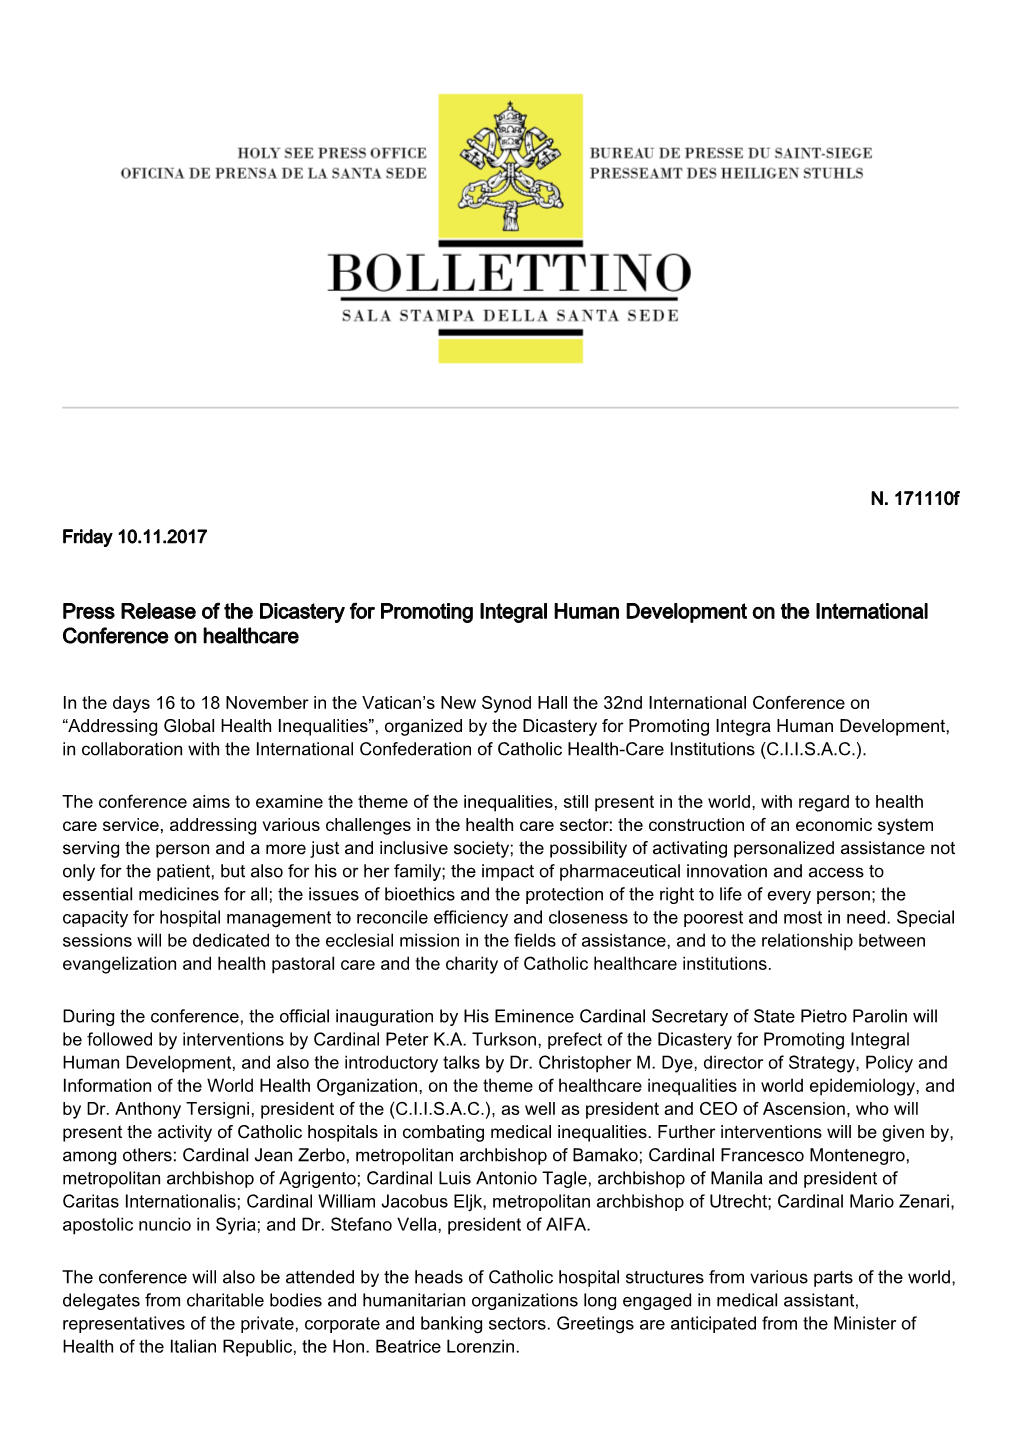 Press Release of the Dicastery for Promoting Integral Human Development on the International Conference on Healthcare